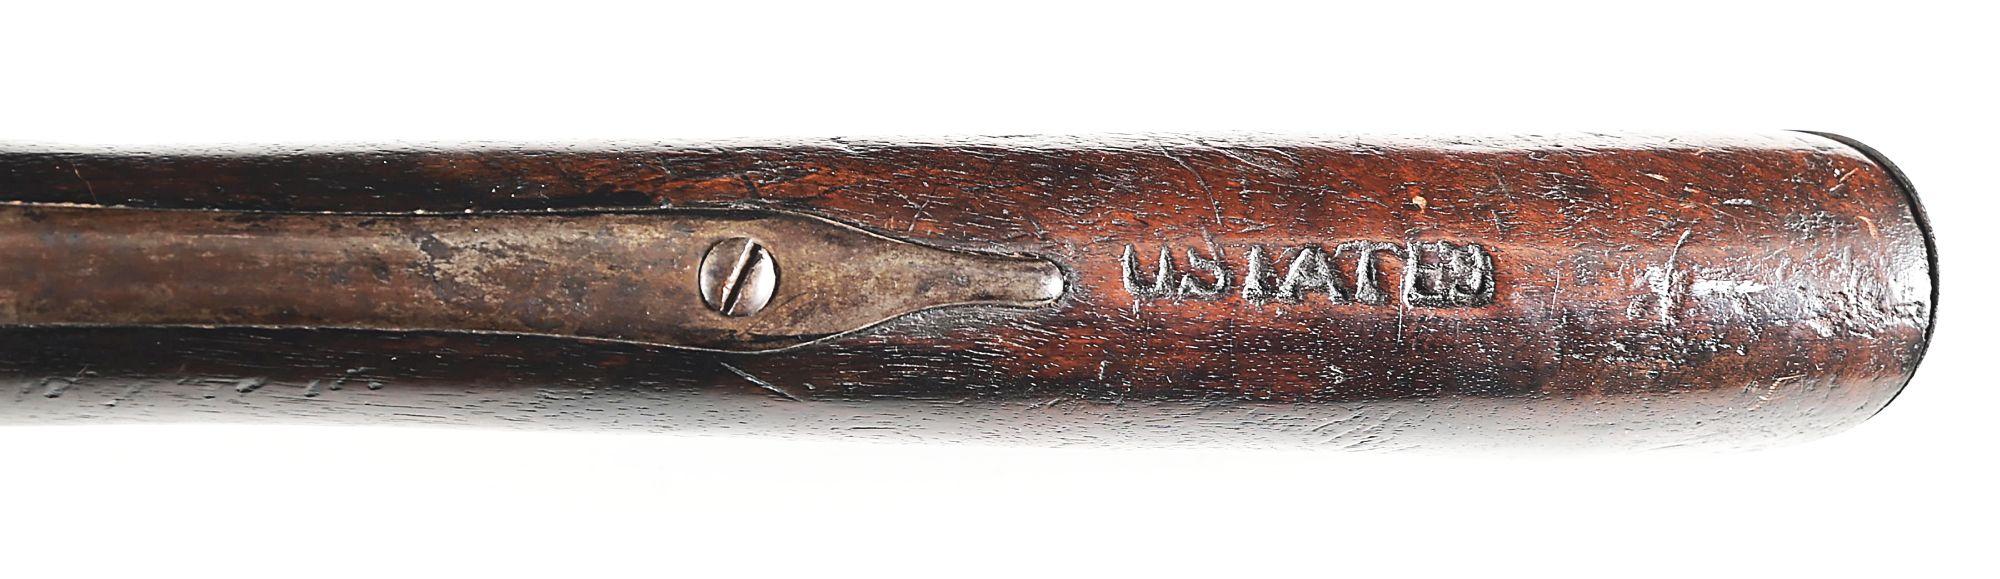 (A) U. STATES BRANDED AND US SURCHARGED MODEL 1766/68 CHARLEVILLE FLINTLOCK MUSKET.